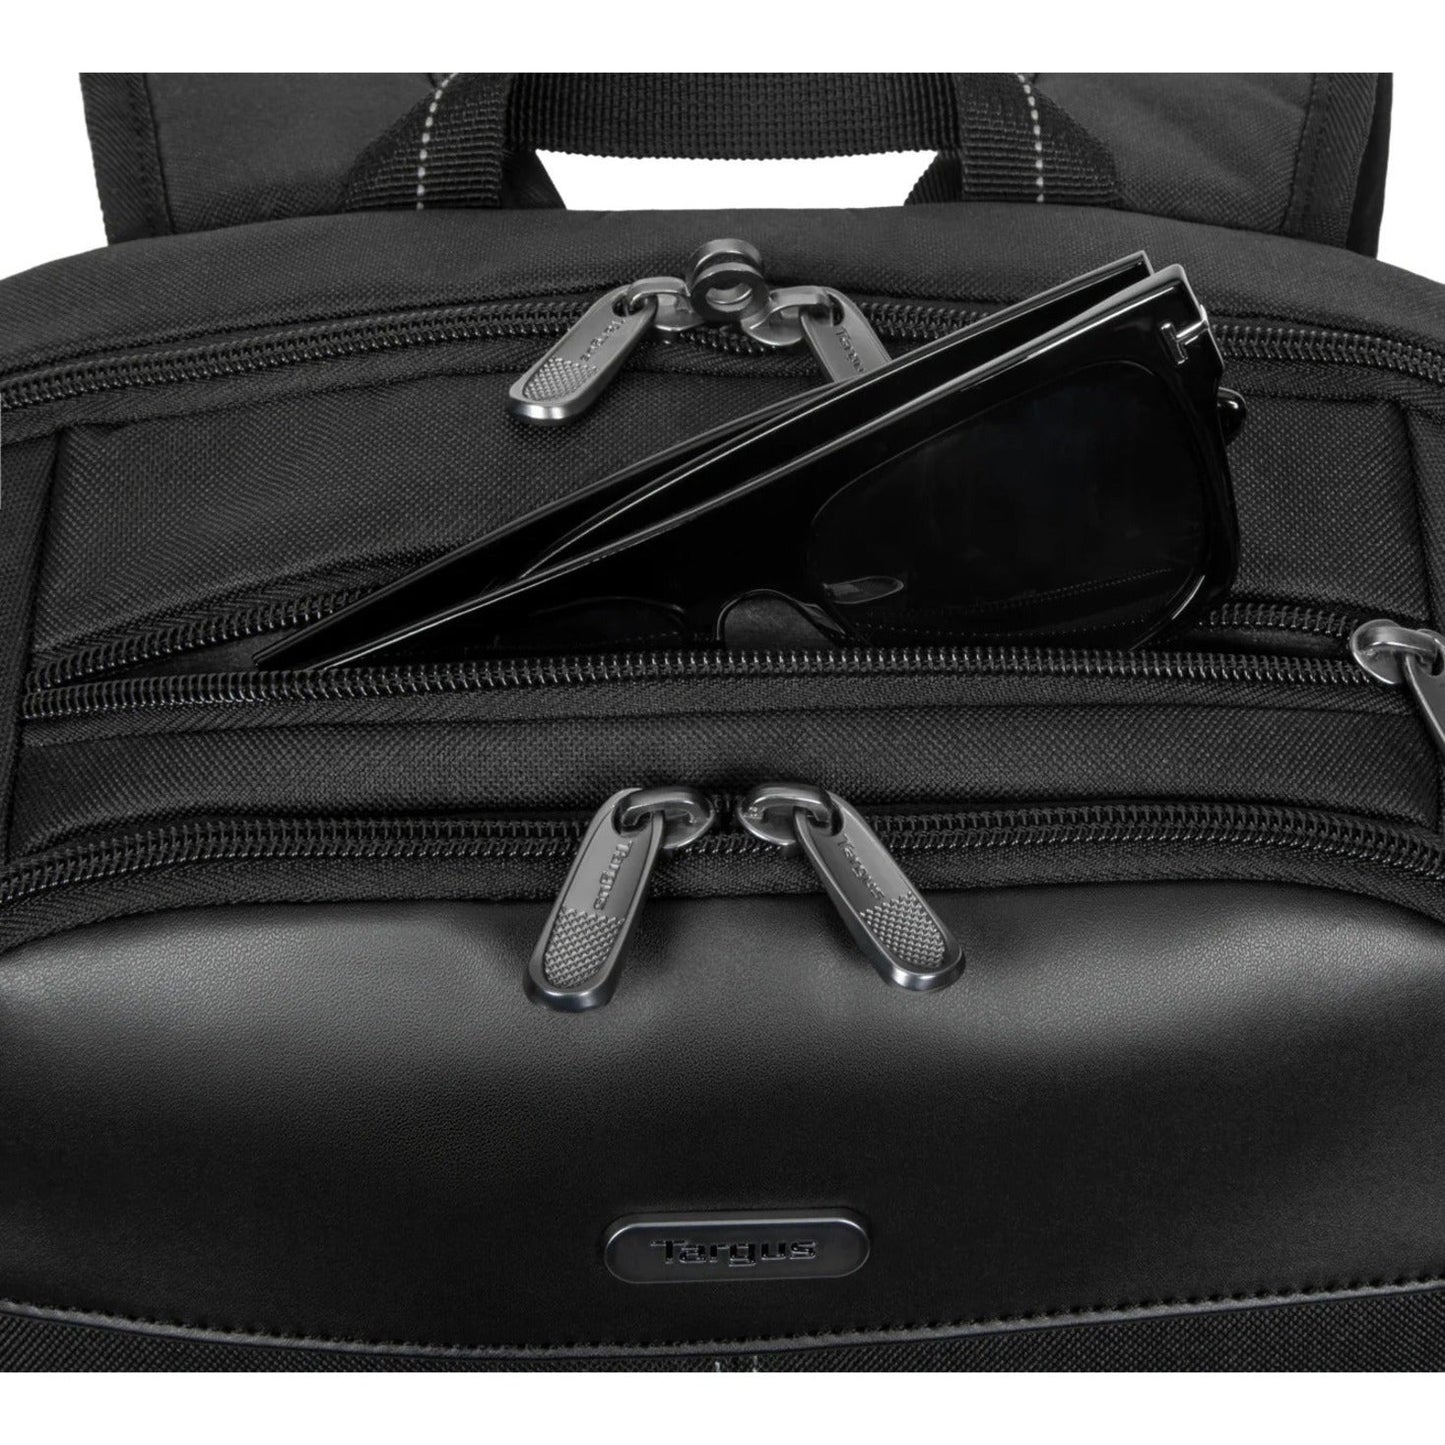 Targus Classic TBB944GL Carrying Case (Backpack) for 17" to 17.3" Notebook Smartphone Accessories - Black